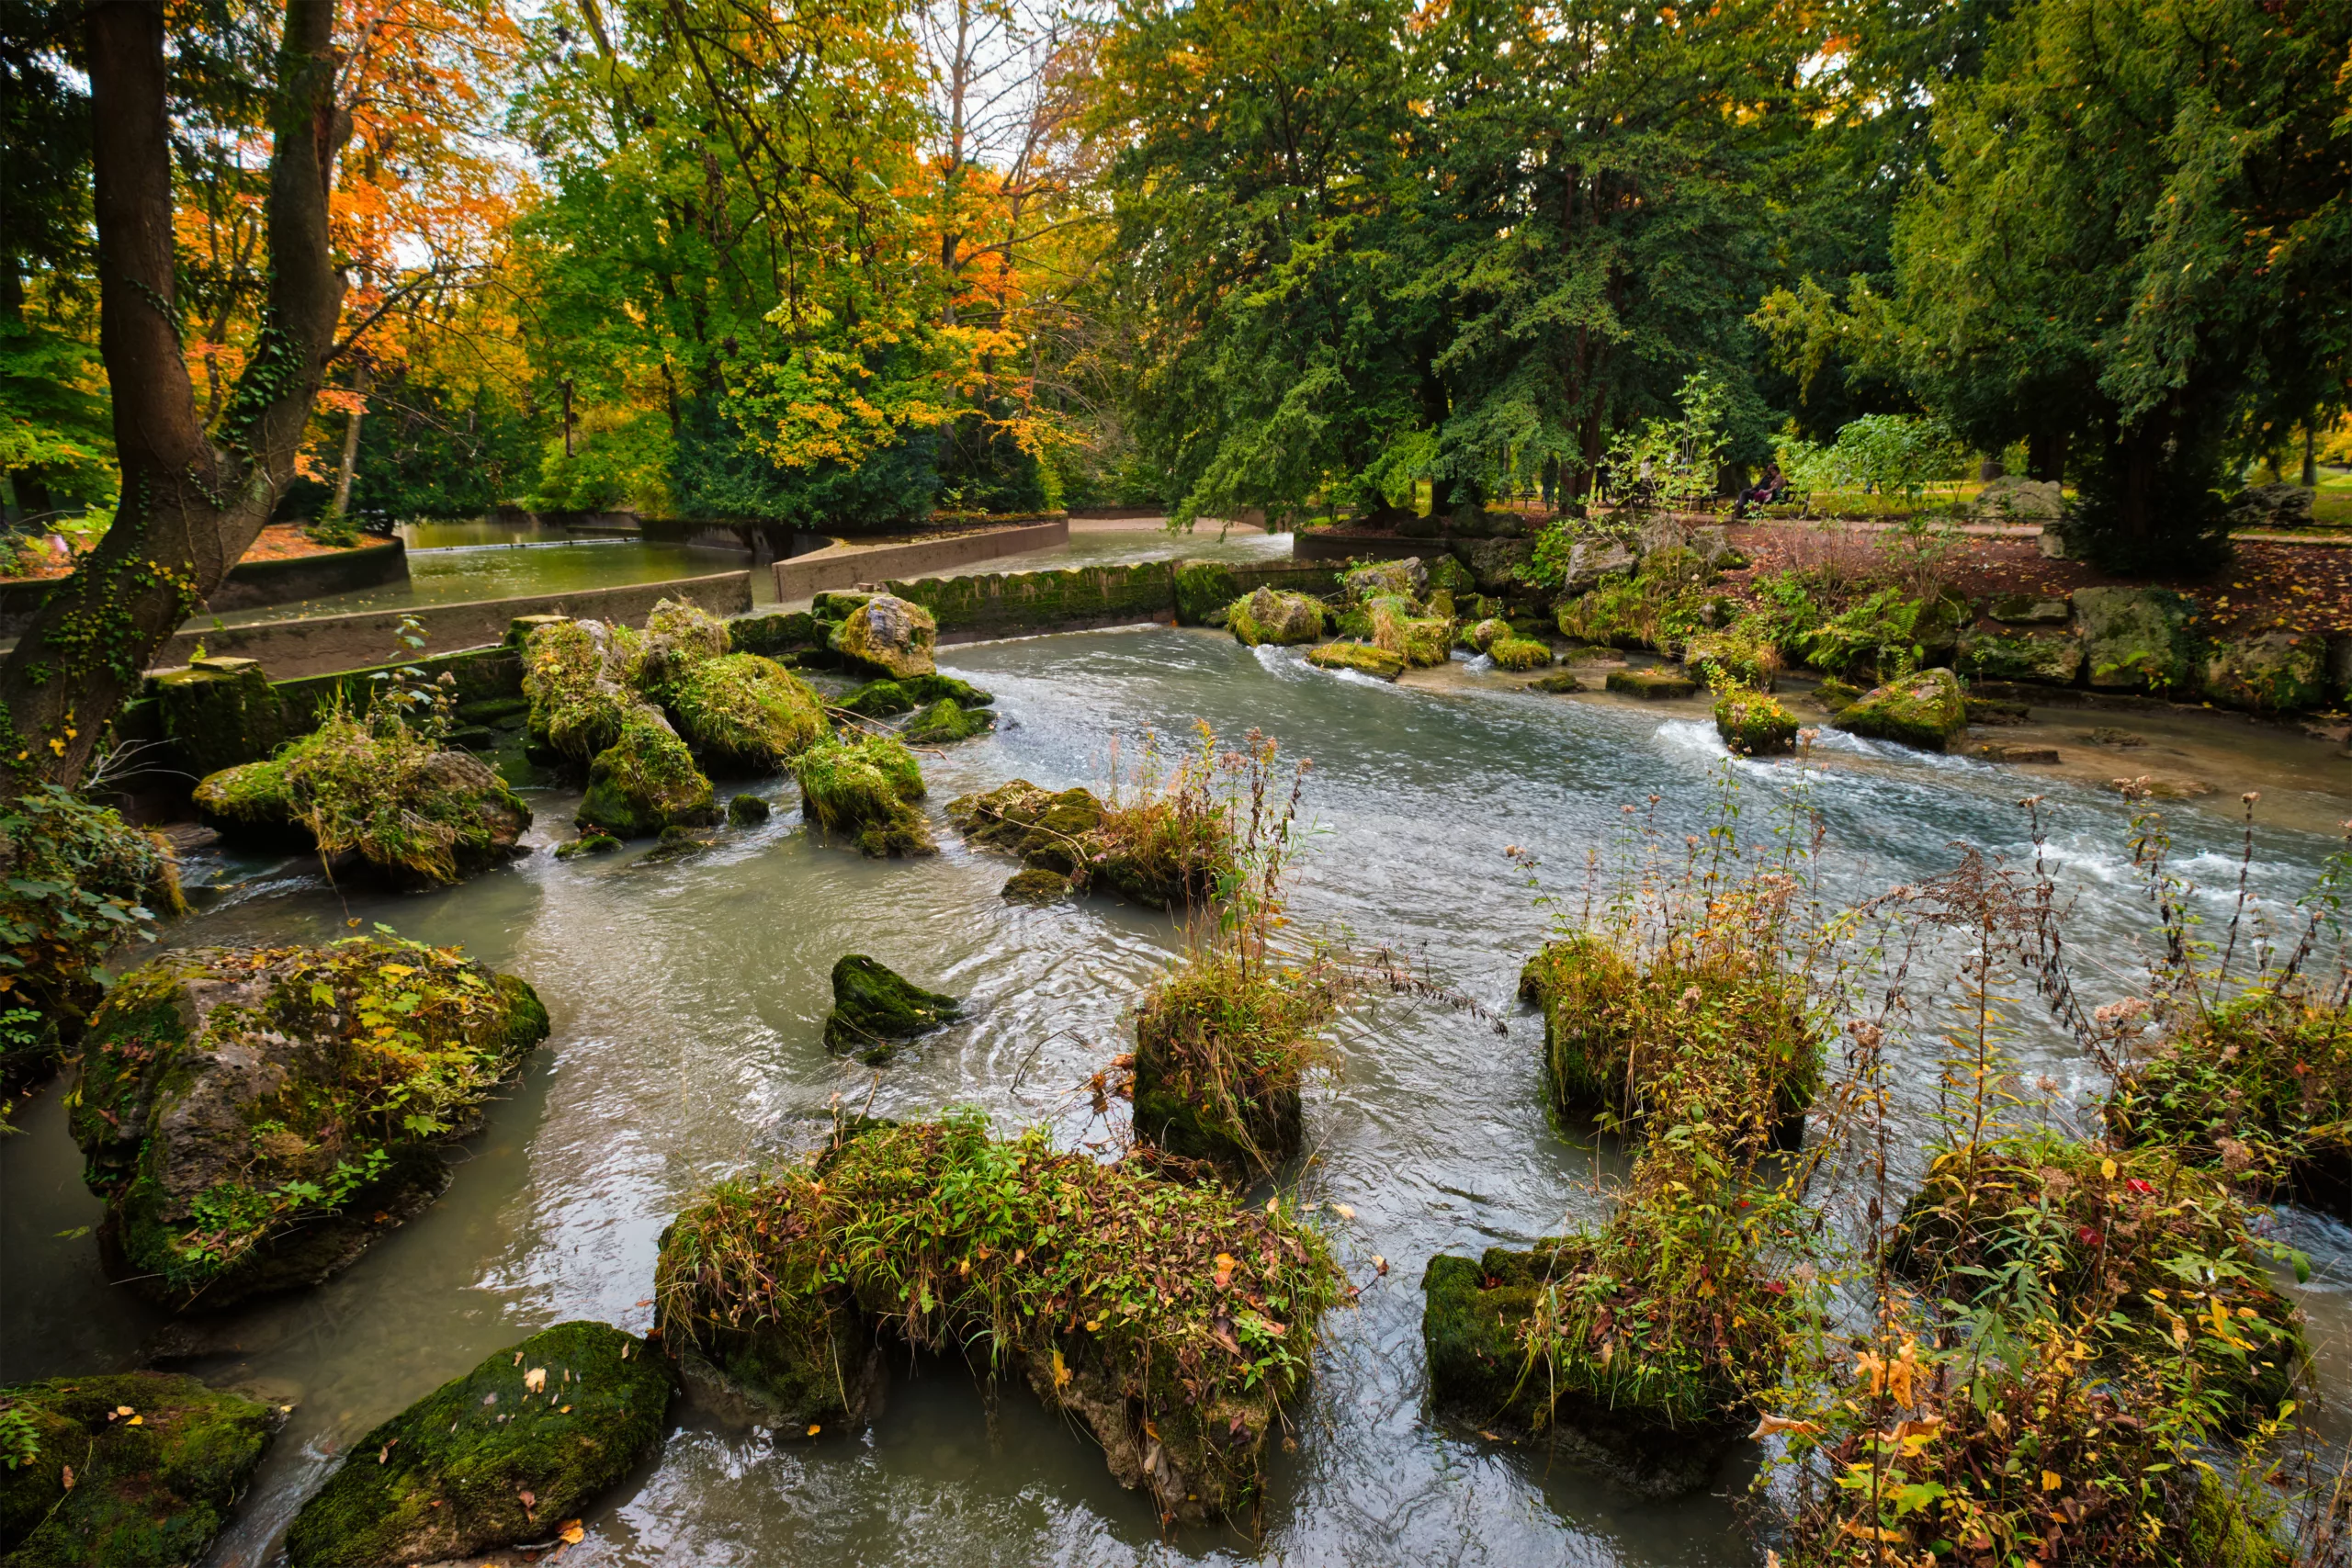 The Eisbach river in the English Gardens in Munich